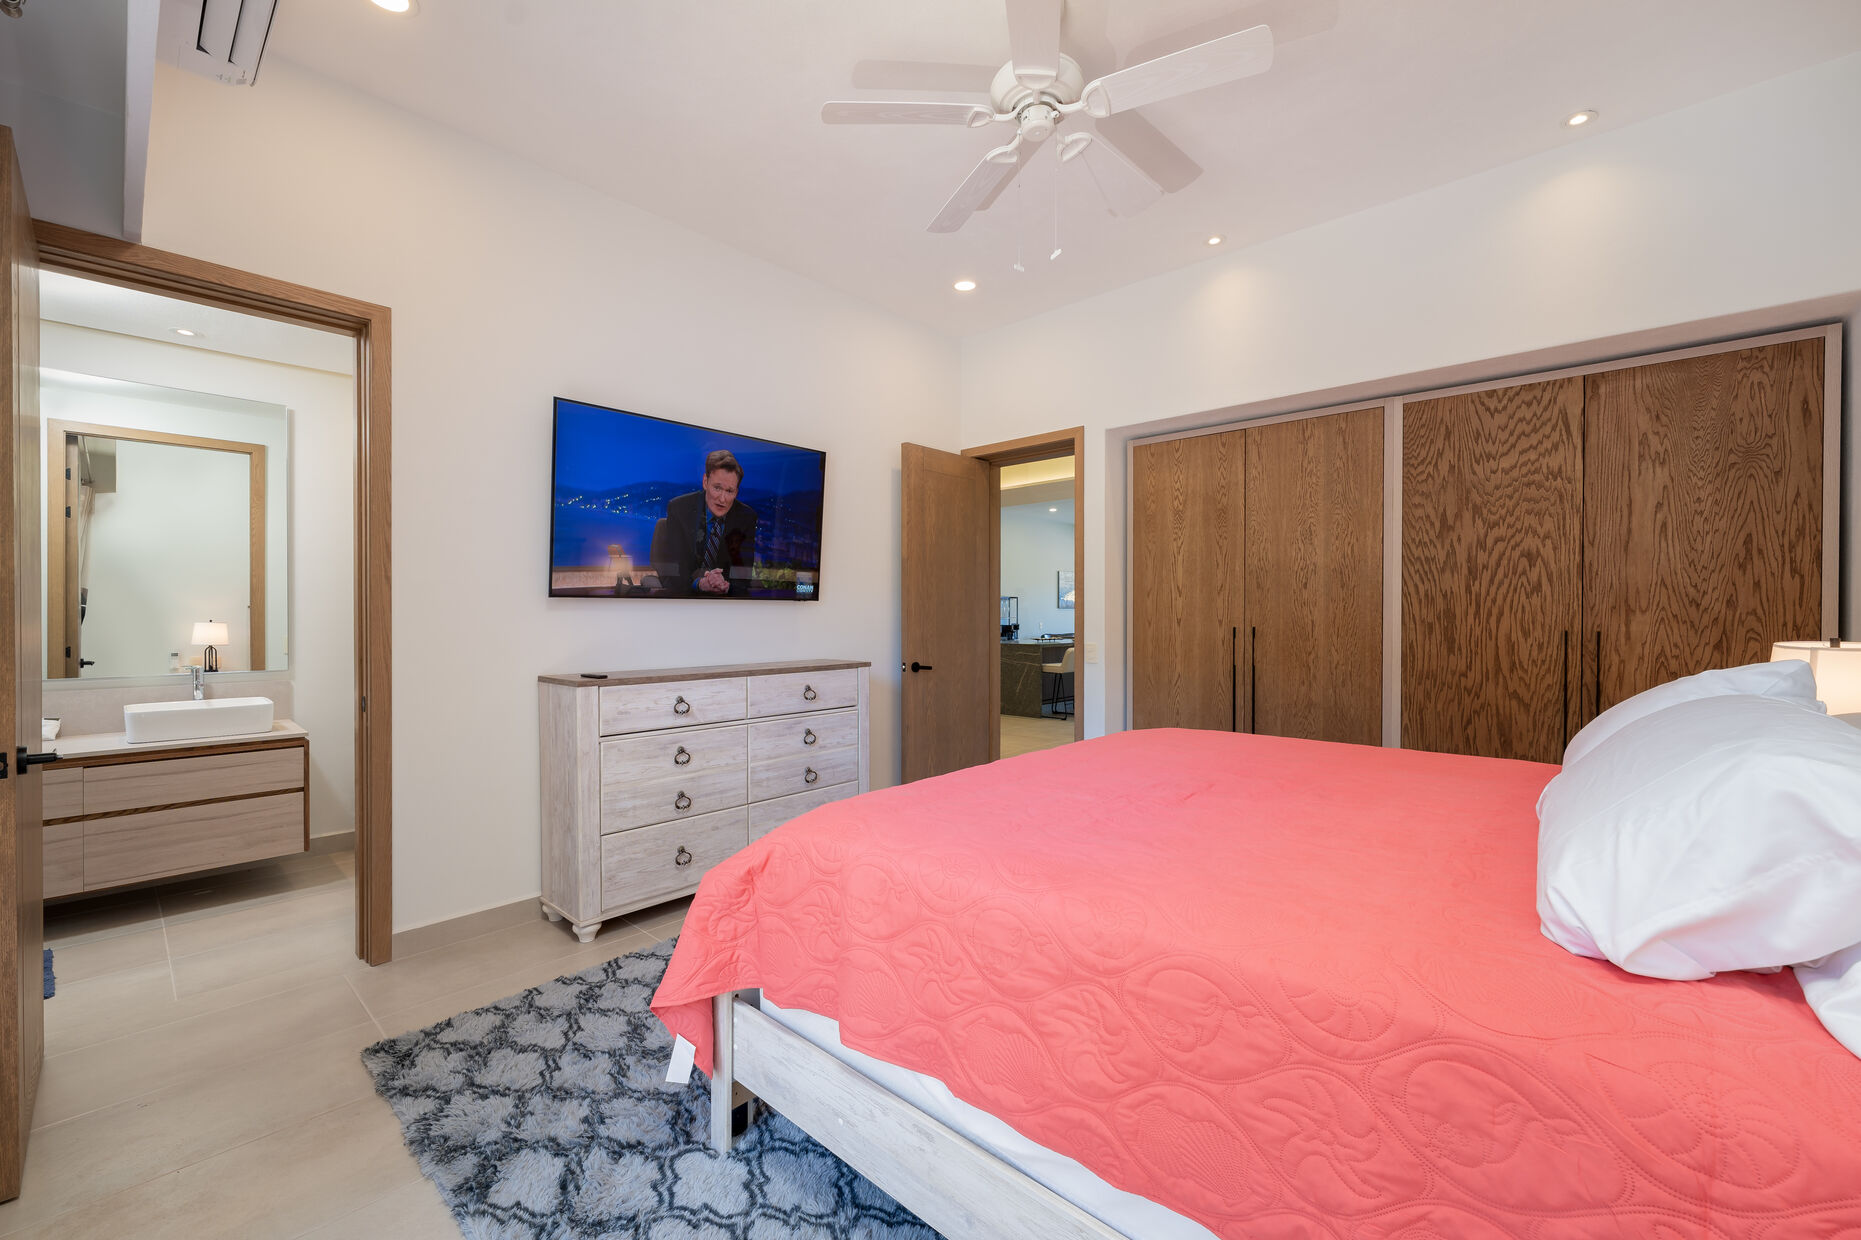 2nd Bedroom
Mountain view/Balcony/ Patio furniture/ Air Conditioning/ Ceiling fan. King size Bed, Wi-Fi. Smart TV/ Private Bathroom.